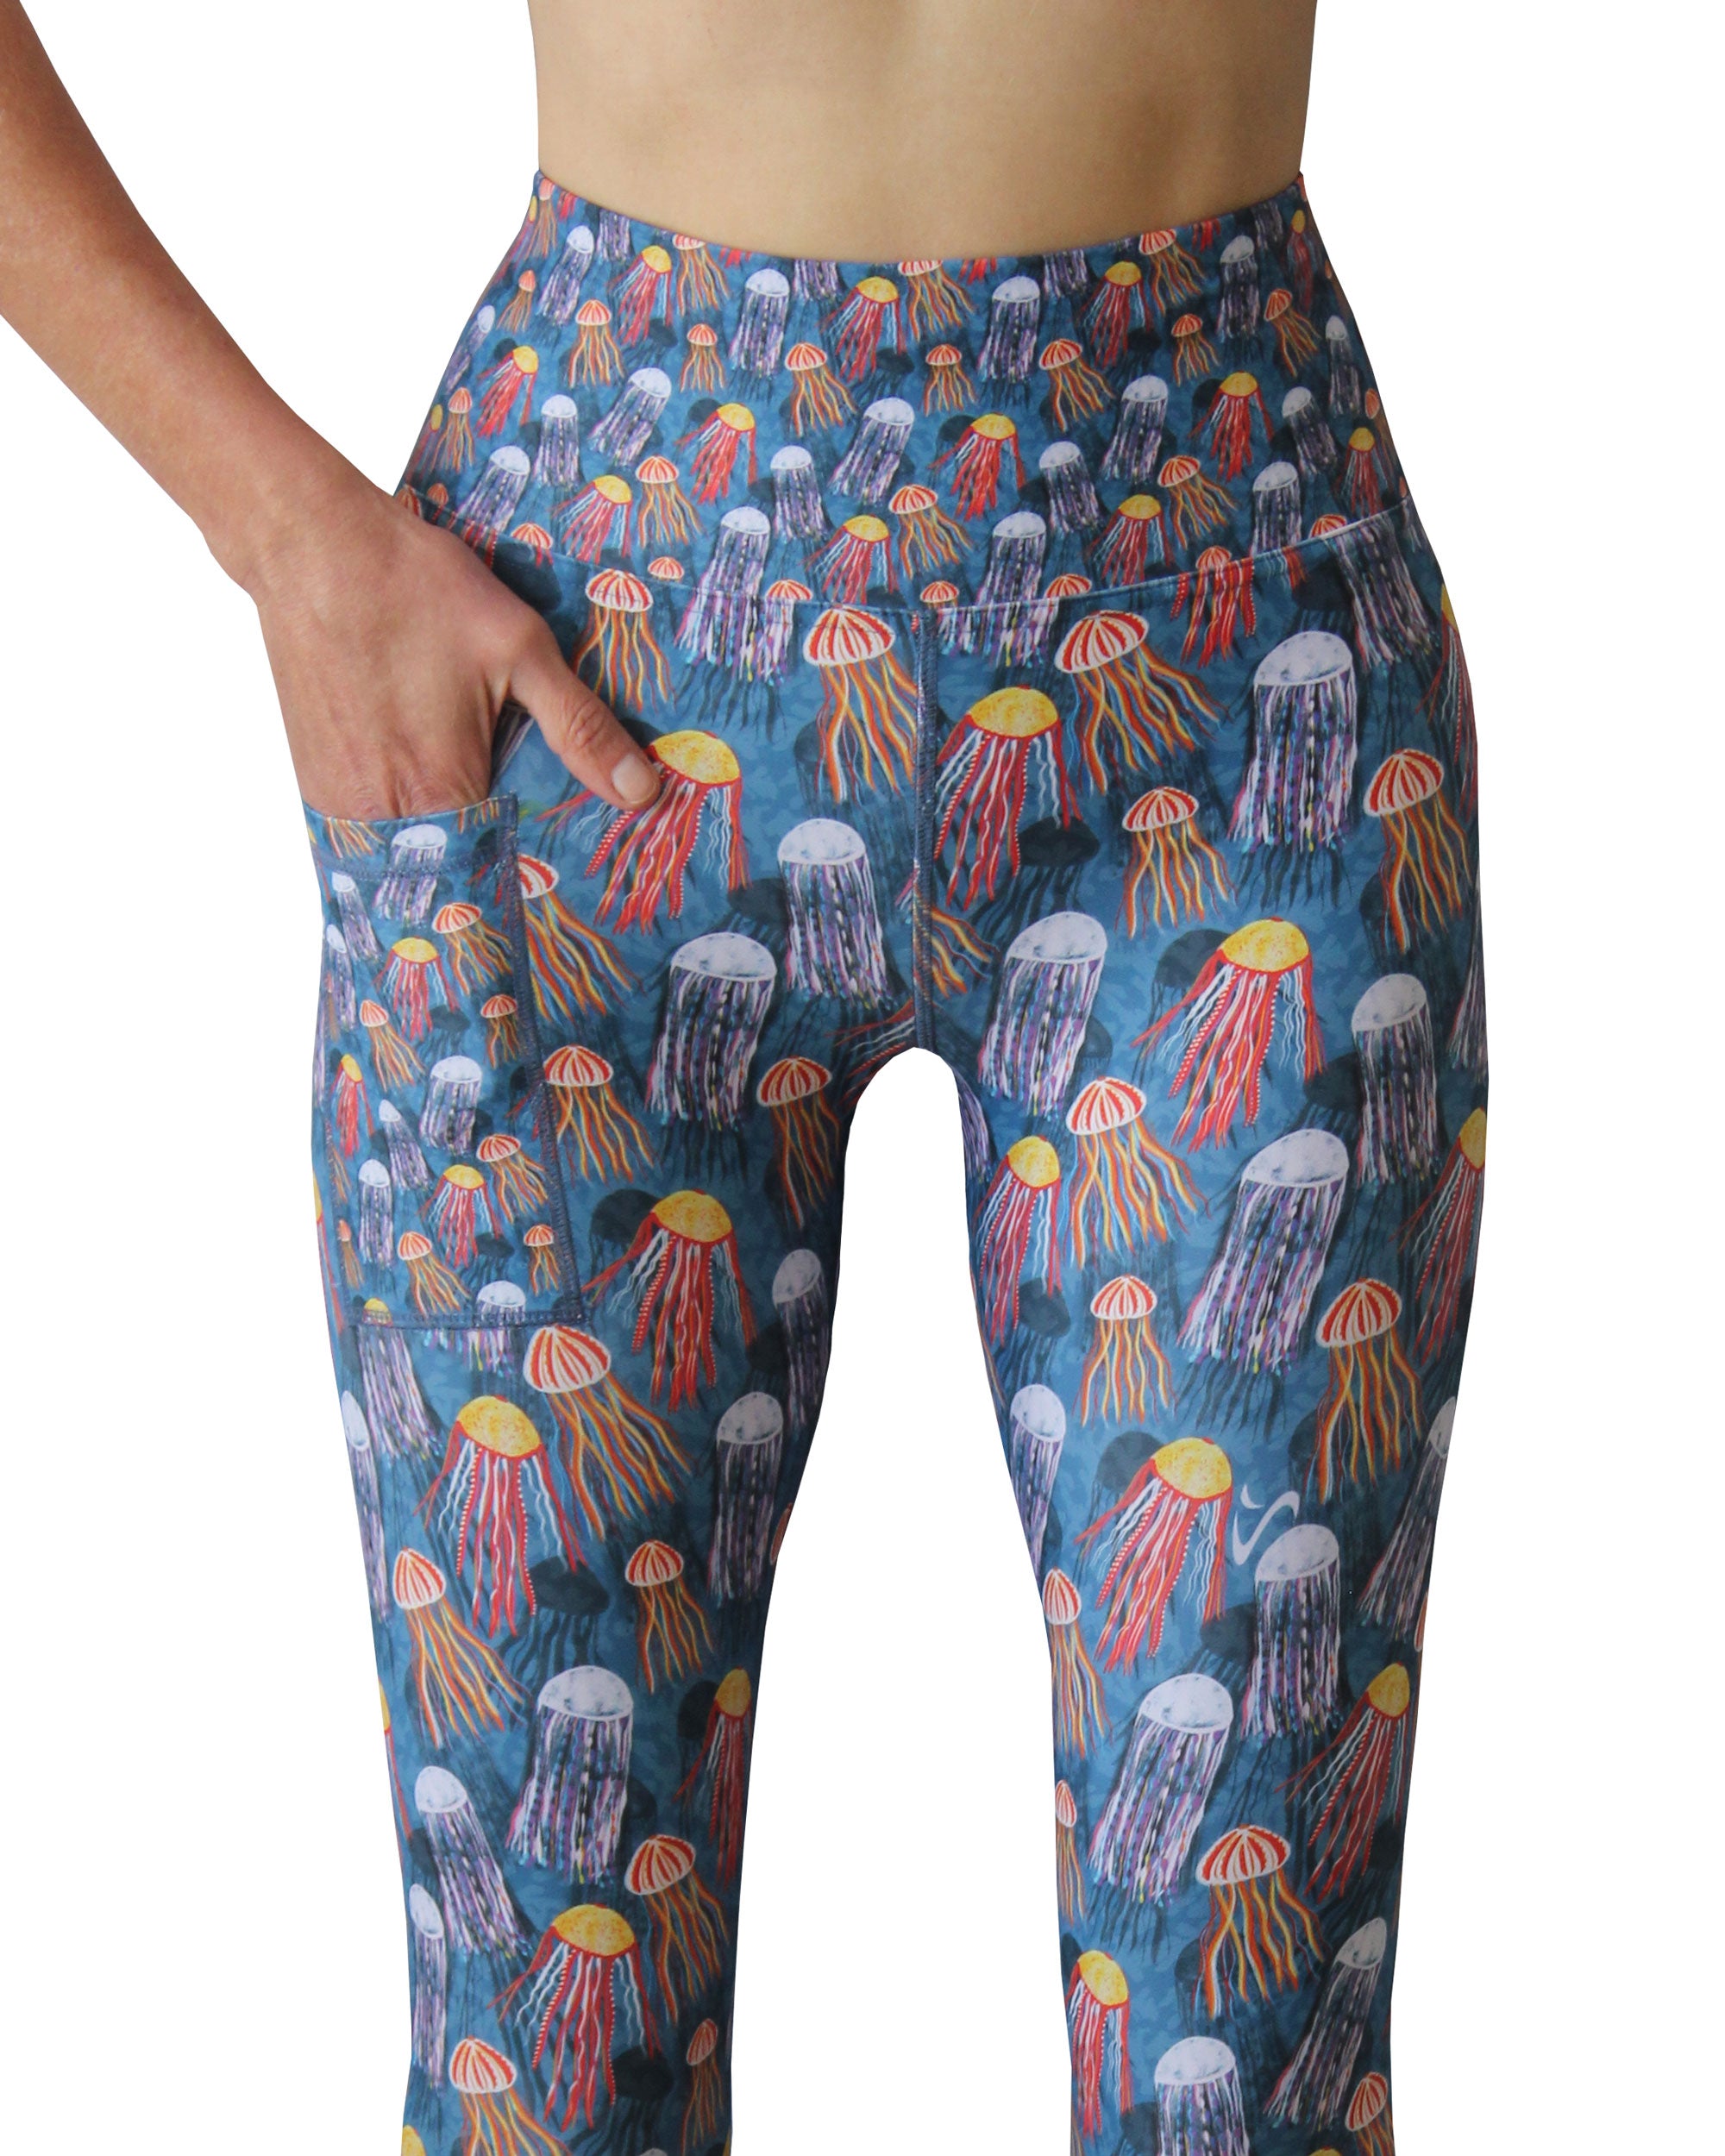 Jellyfish Leggings with high waist and cellphone pocket